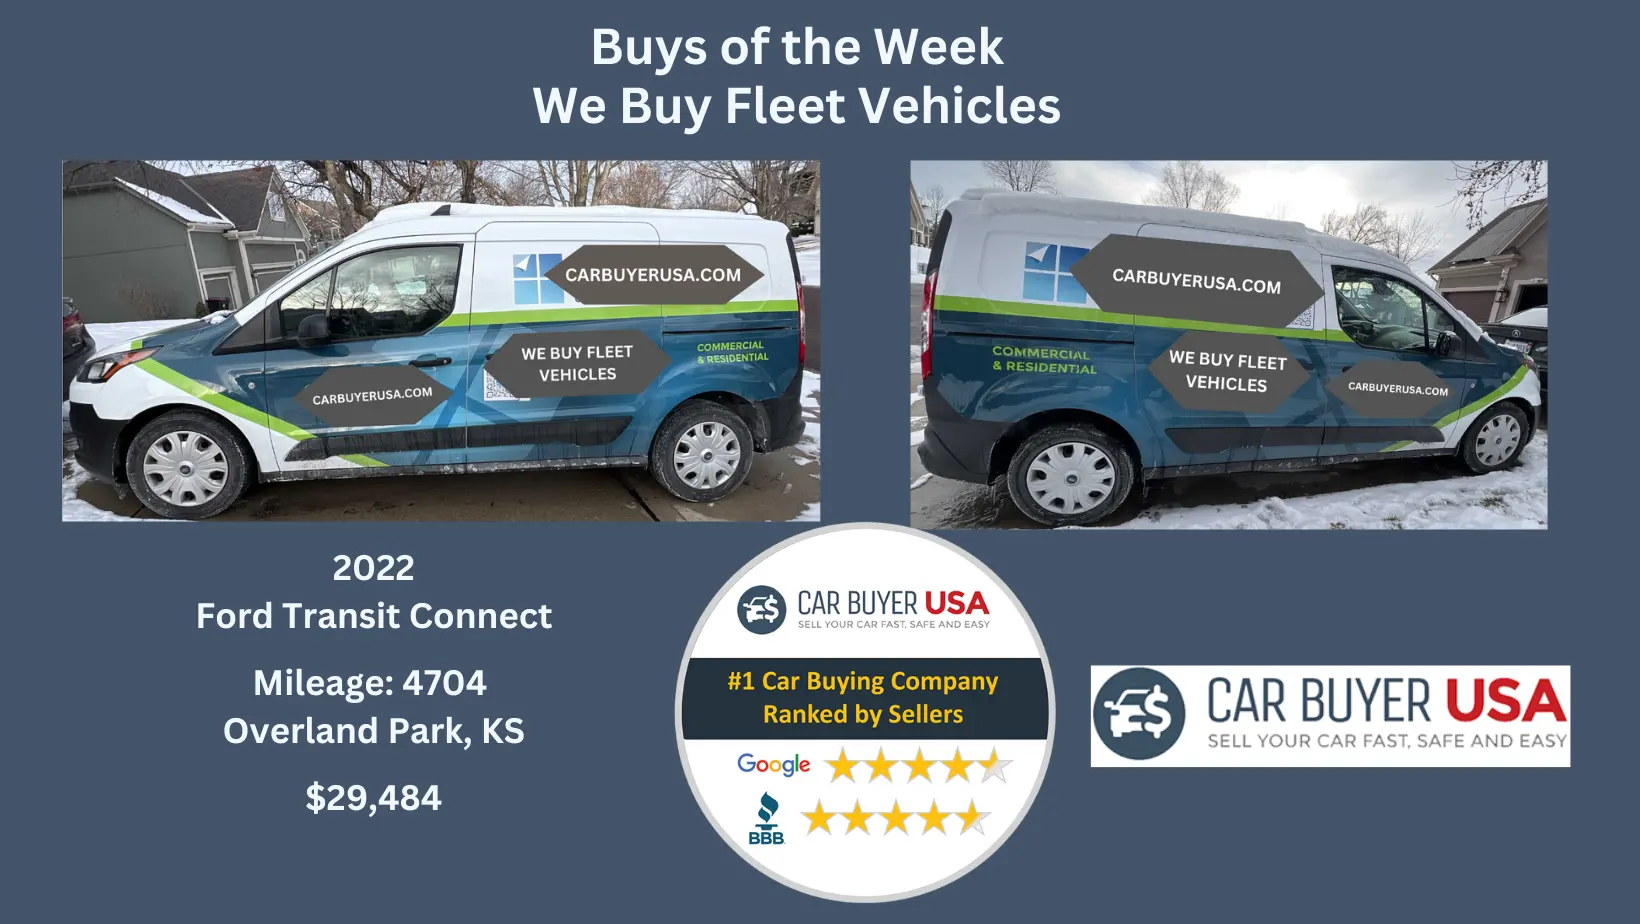 CarBuyerUSA - 2022 Ford Transit Connect, Overland Park, KS - $29,484